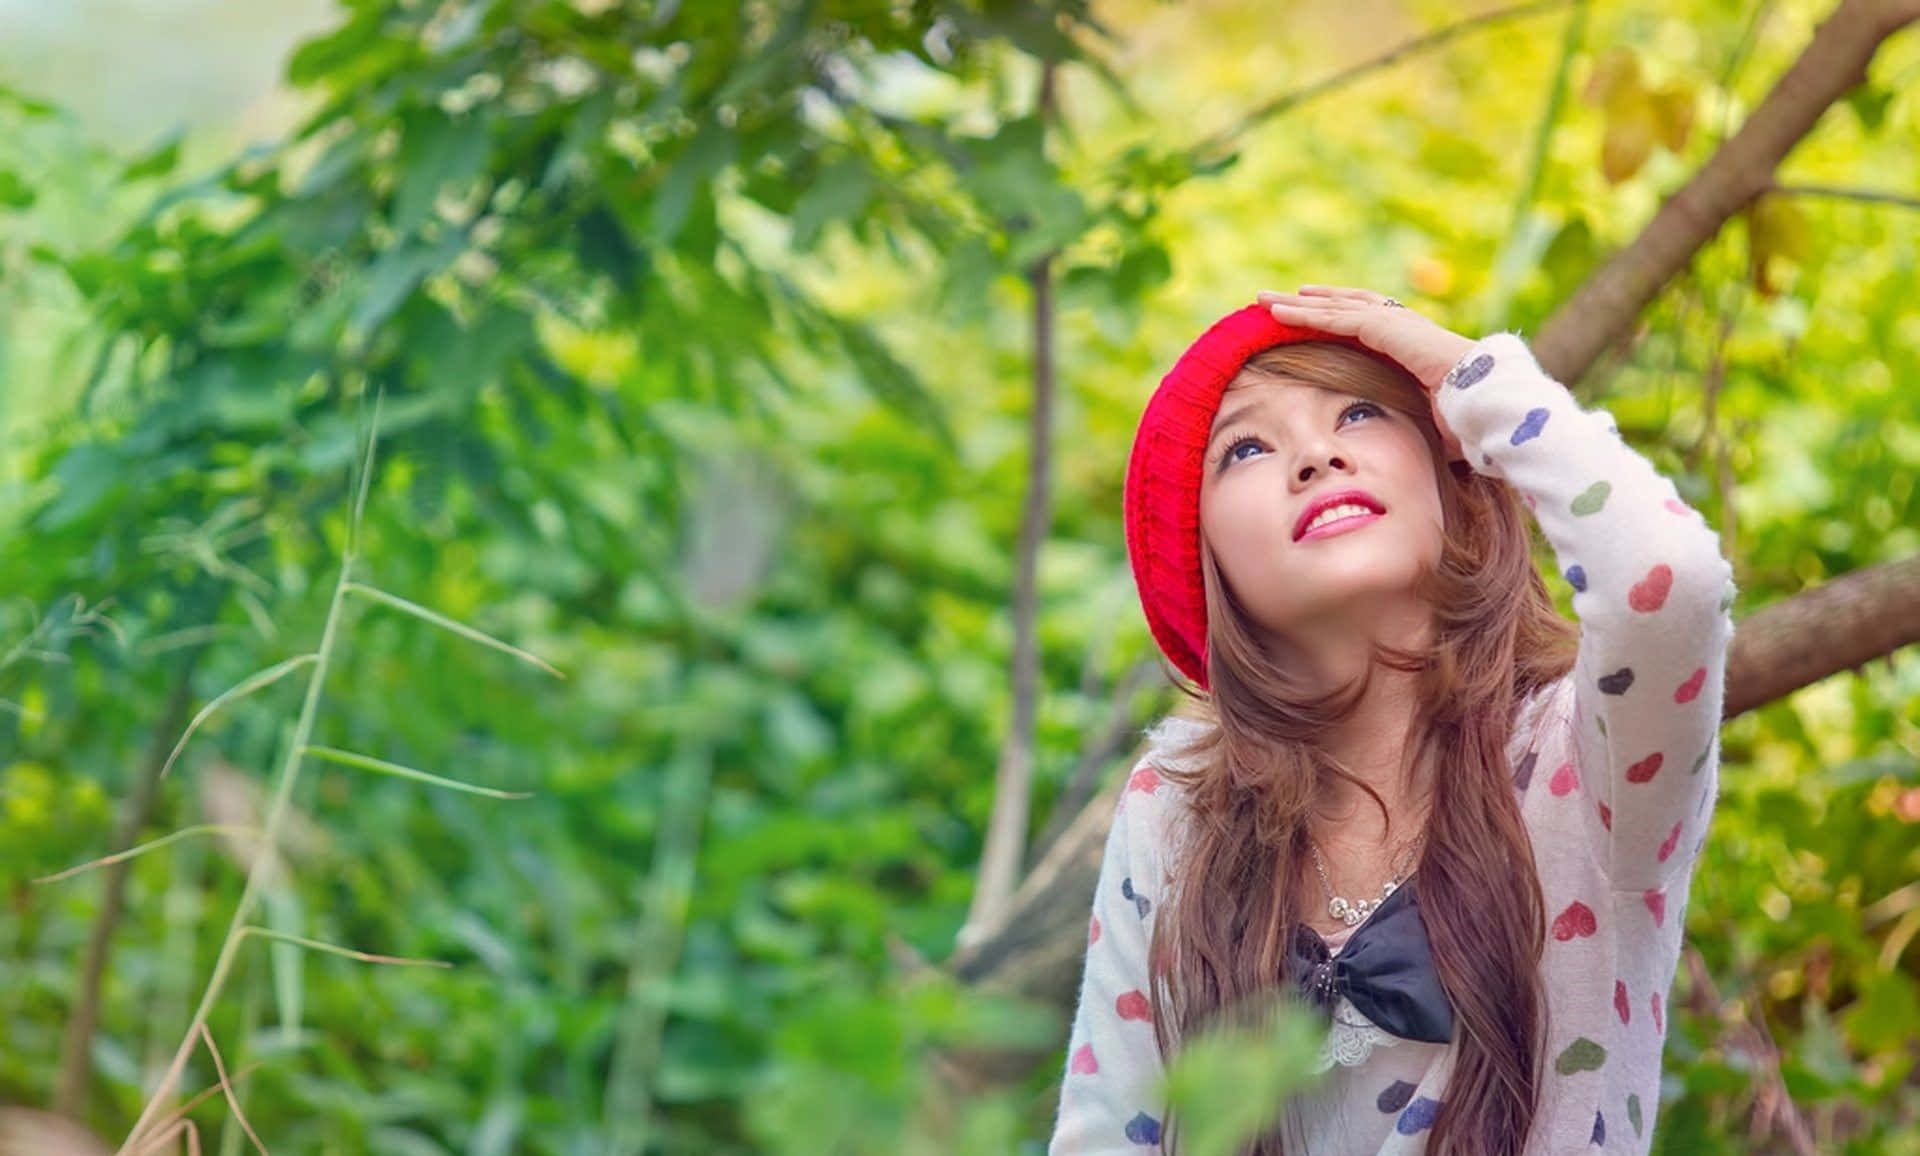 A Girl In A Red Hat Is Looking Up At The Sky